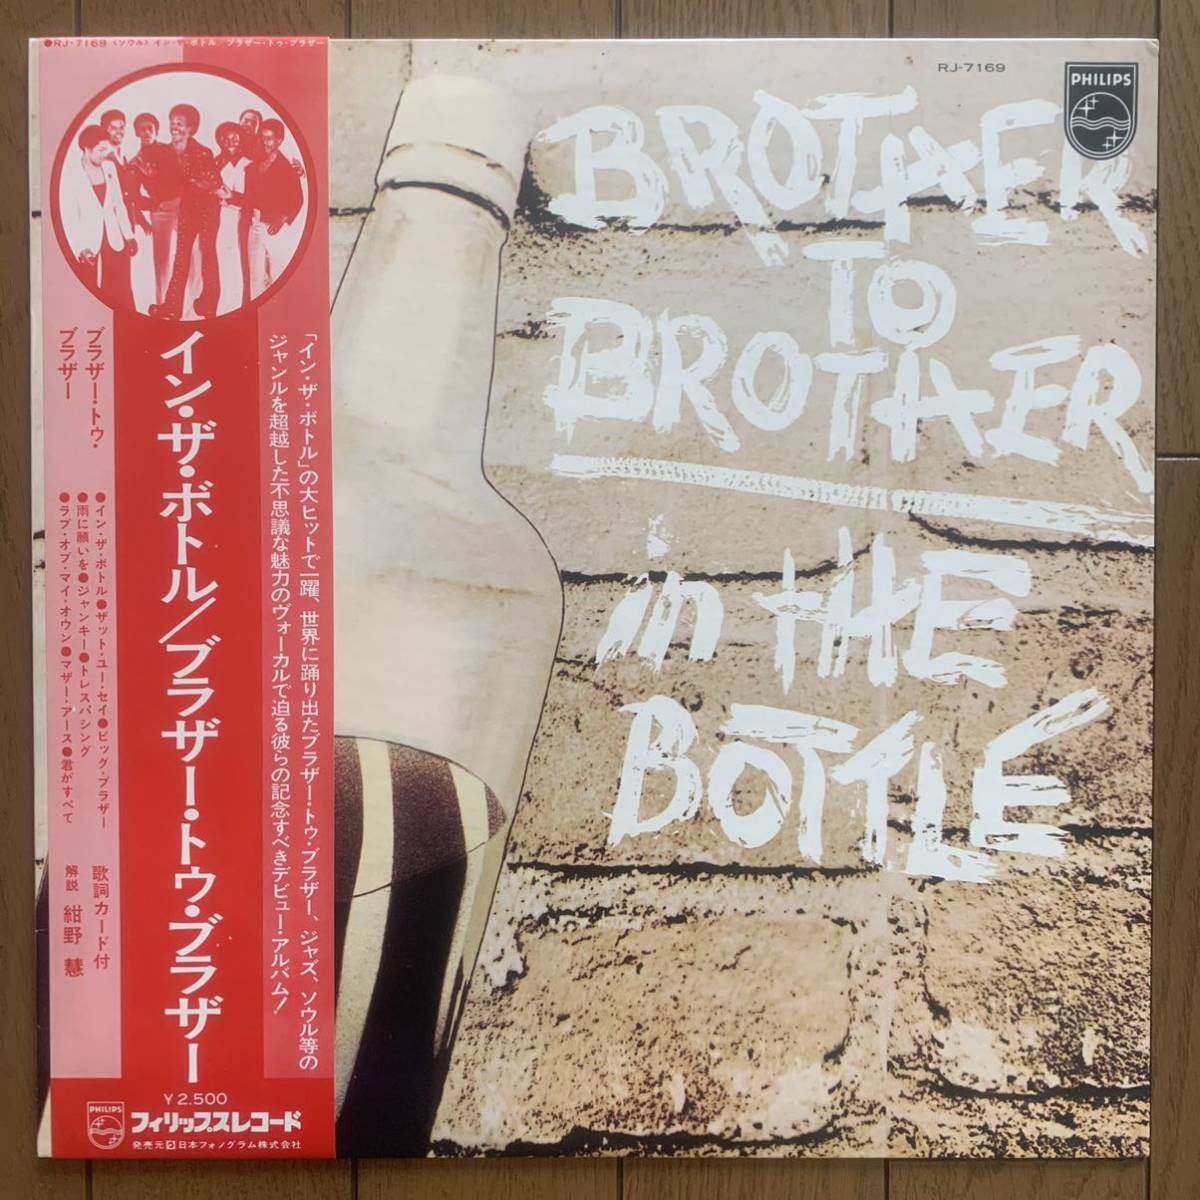 BROTHER TO BROTHER / IN THE BOTTLE (PHILIPS) 国内見本盤 - 帯_画像1